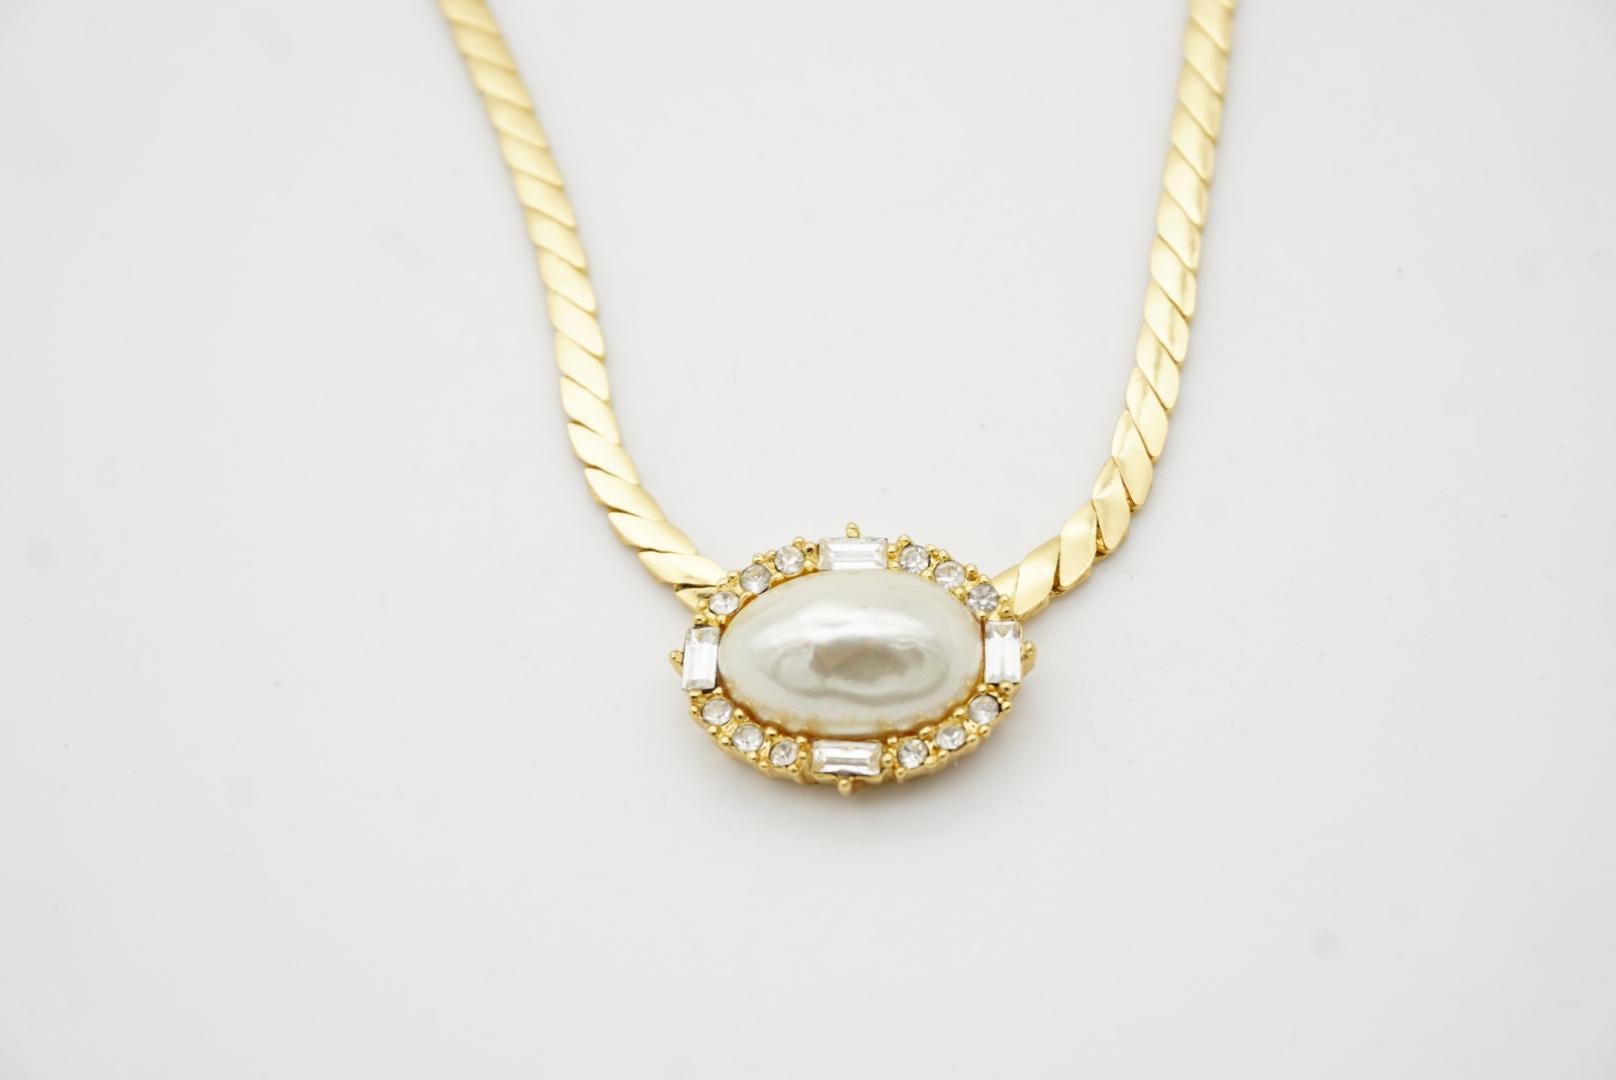 Christian Dior Vintage 1980s Large White Oval Pearl Crystals Pendant Necklace For Sale 1